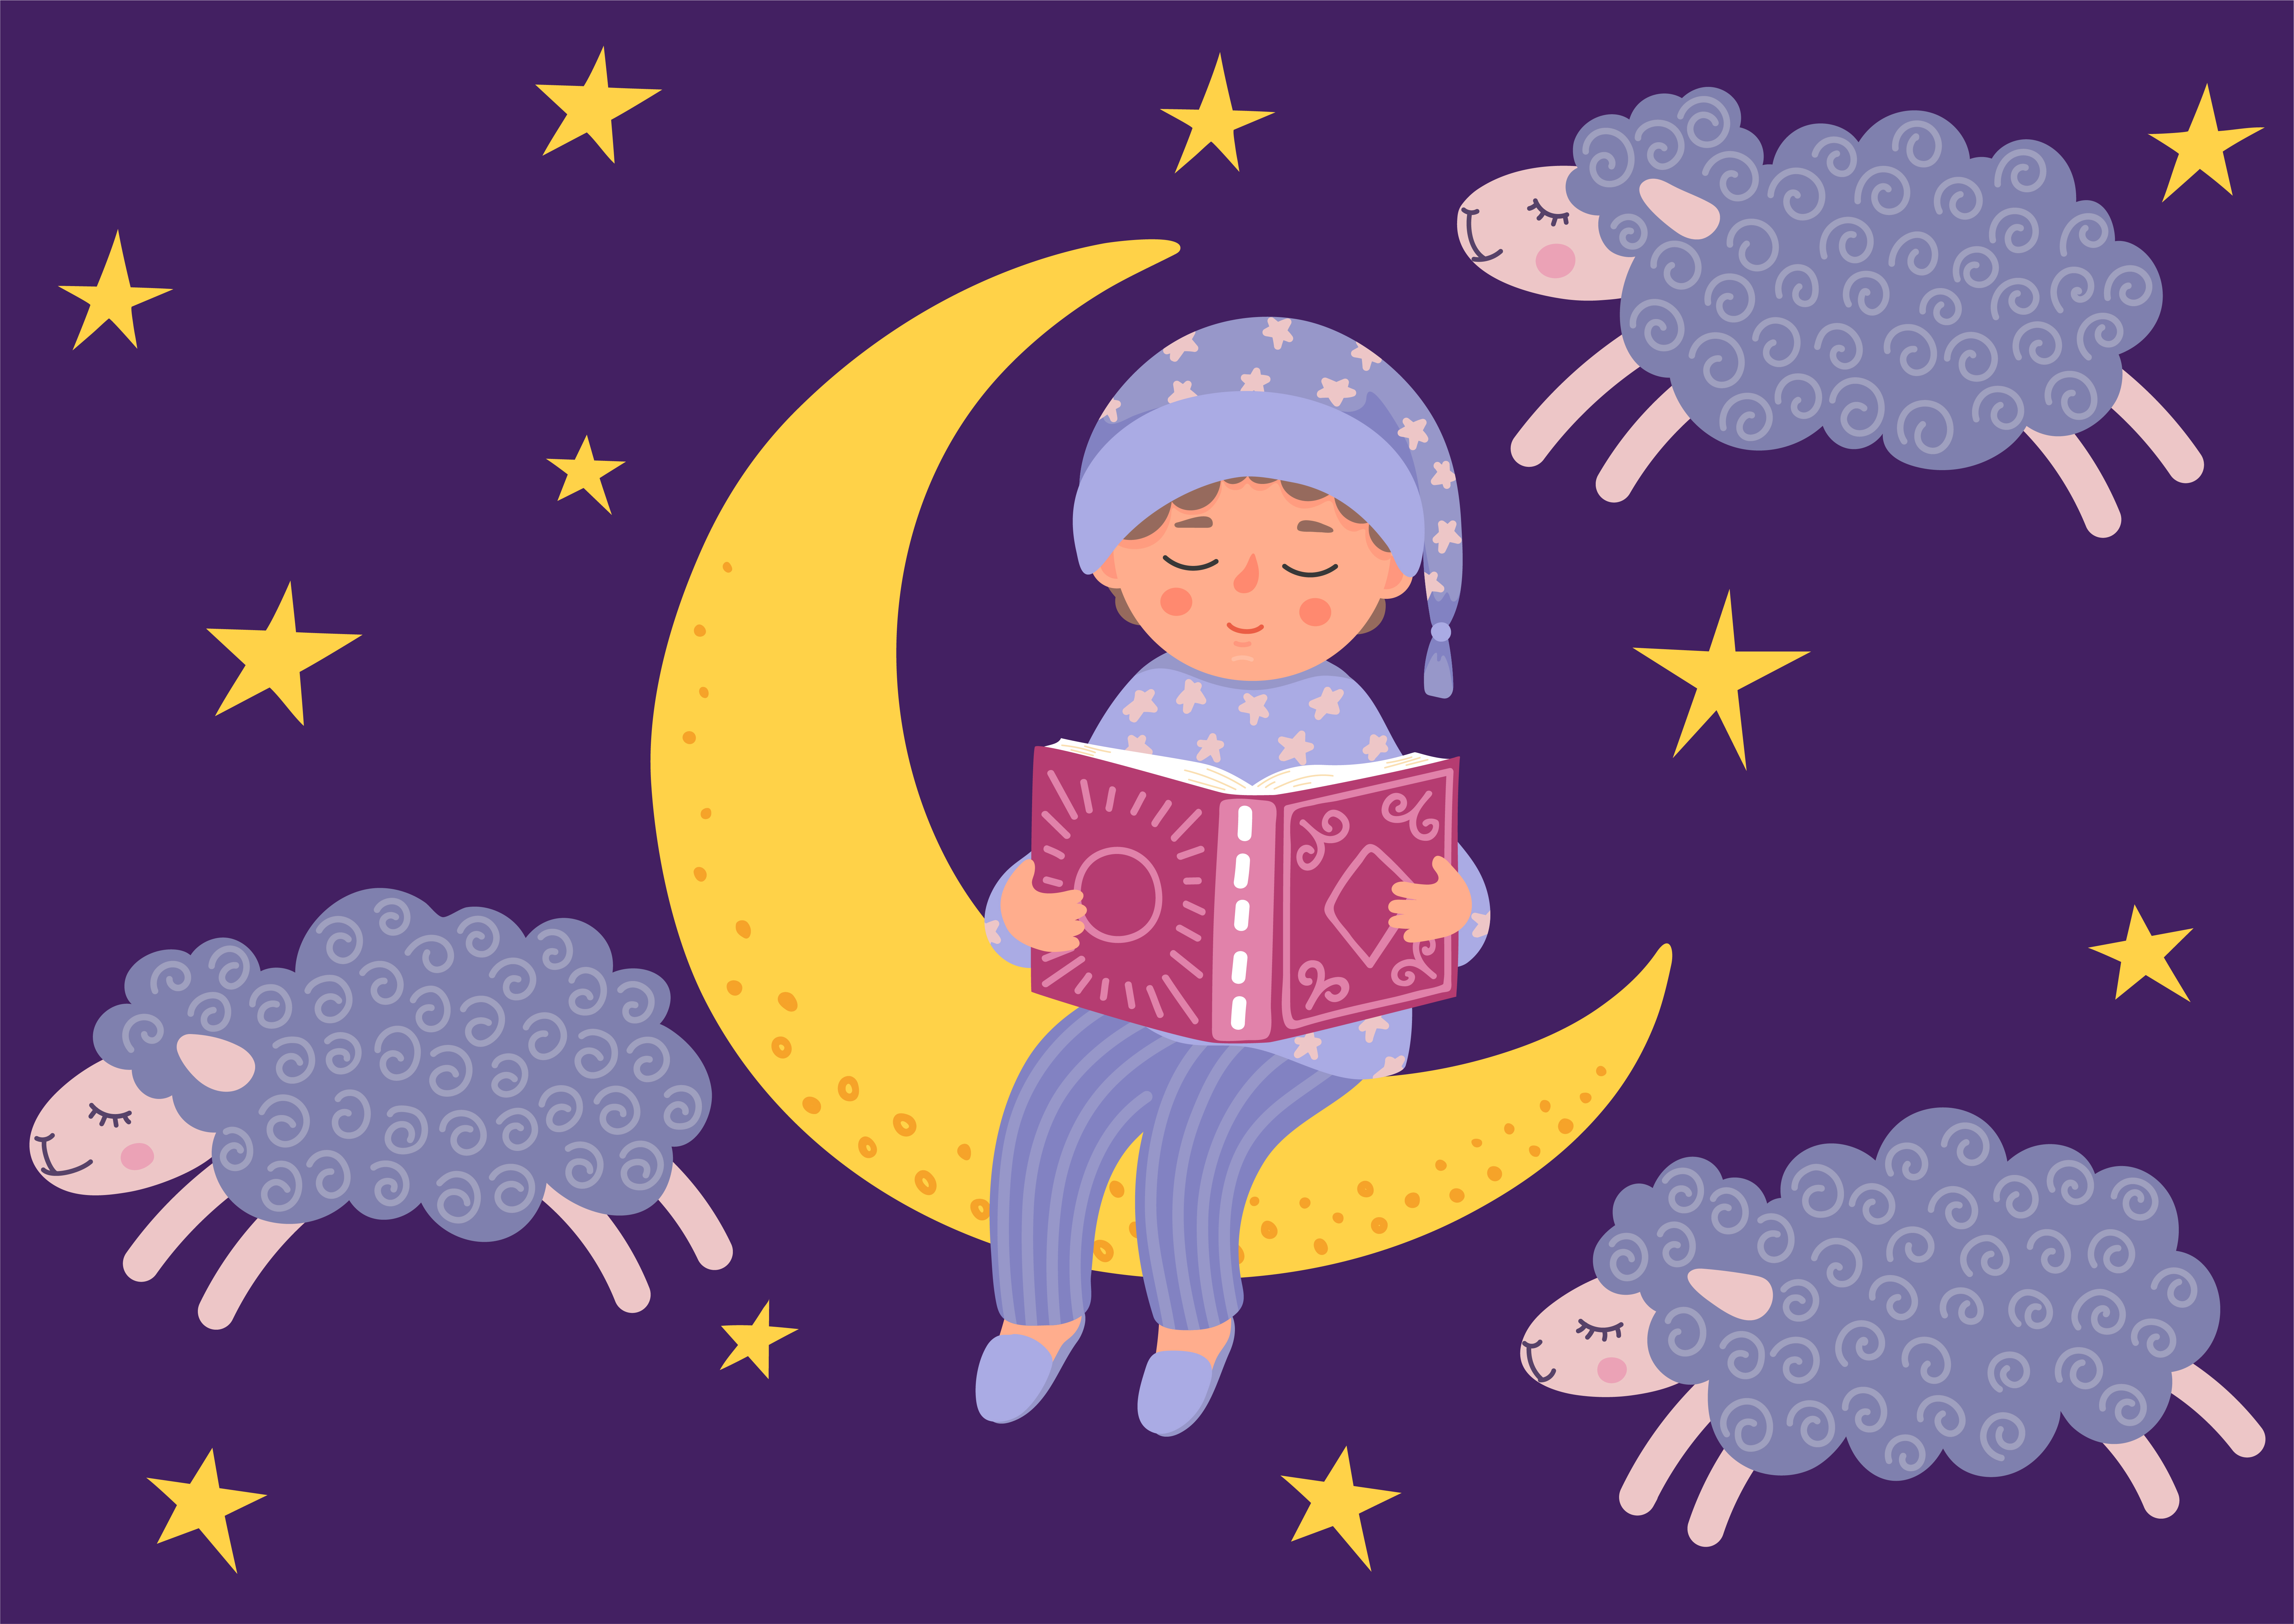 A boy sitting on a moon in pajamas reading a book surrounded by sheep.